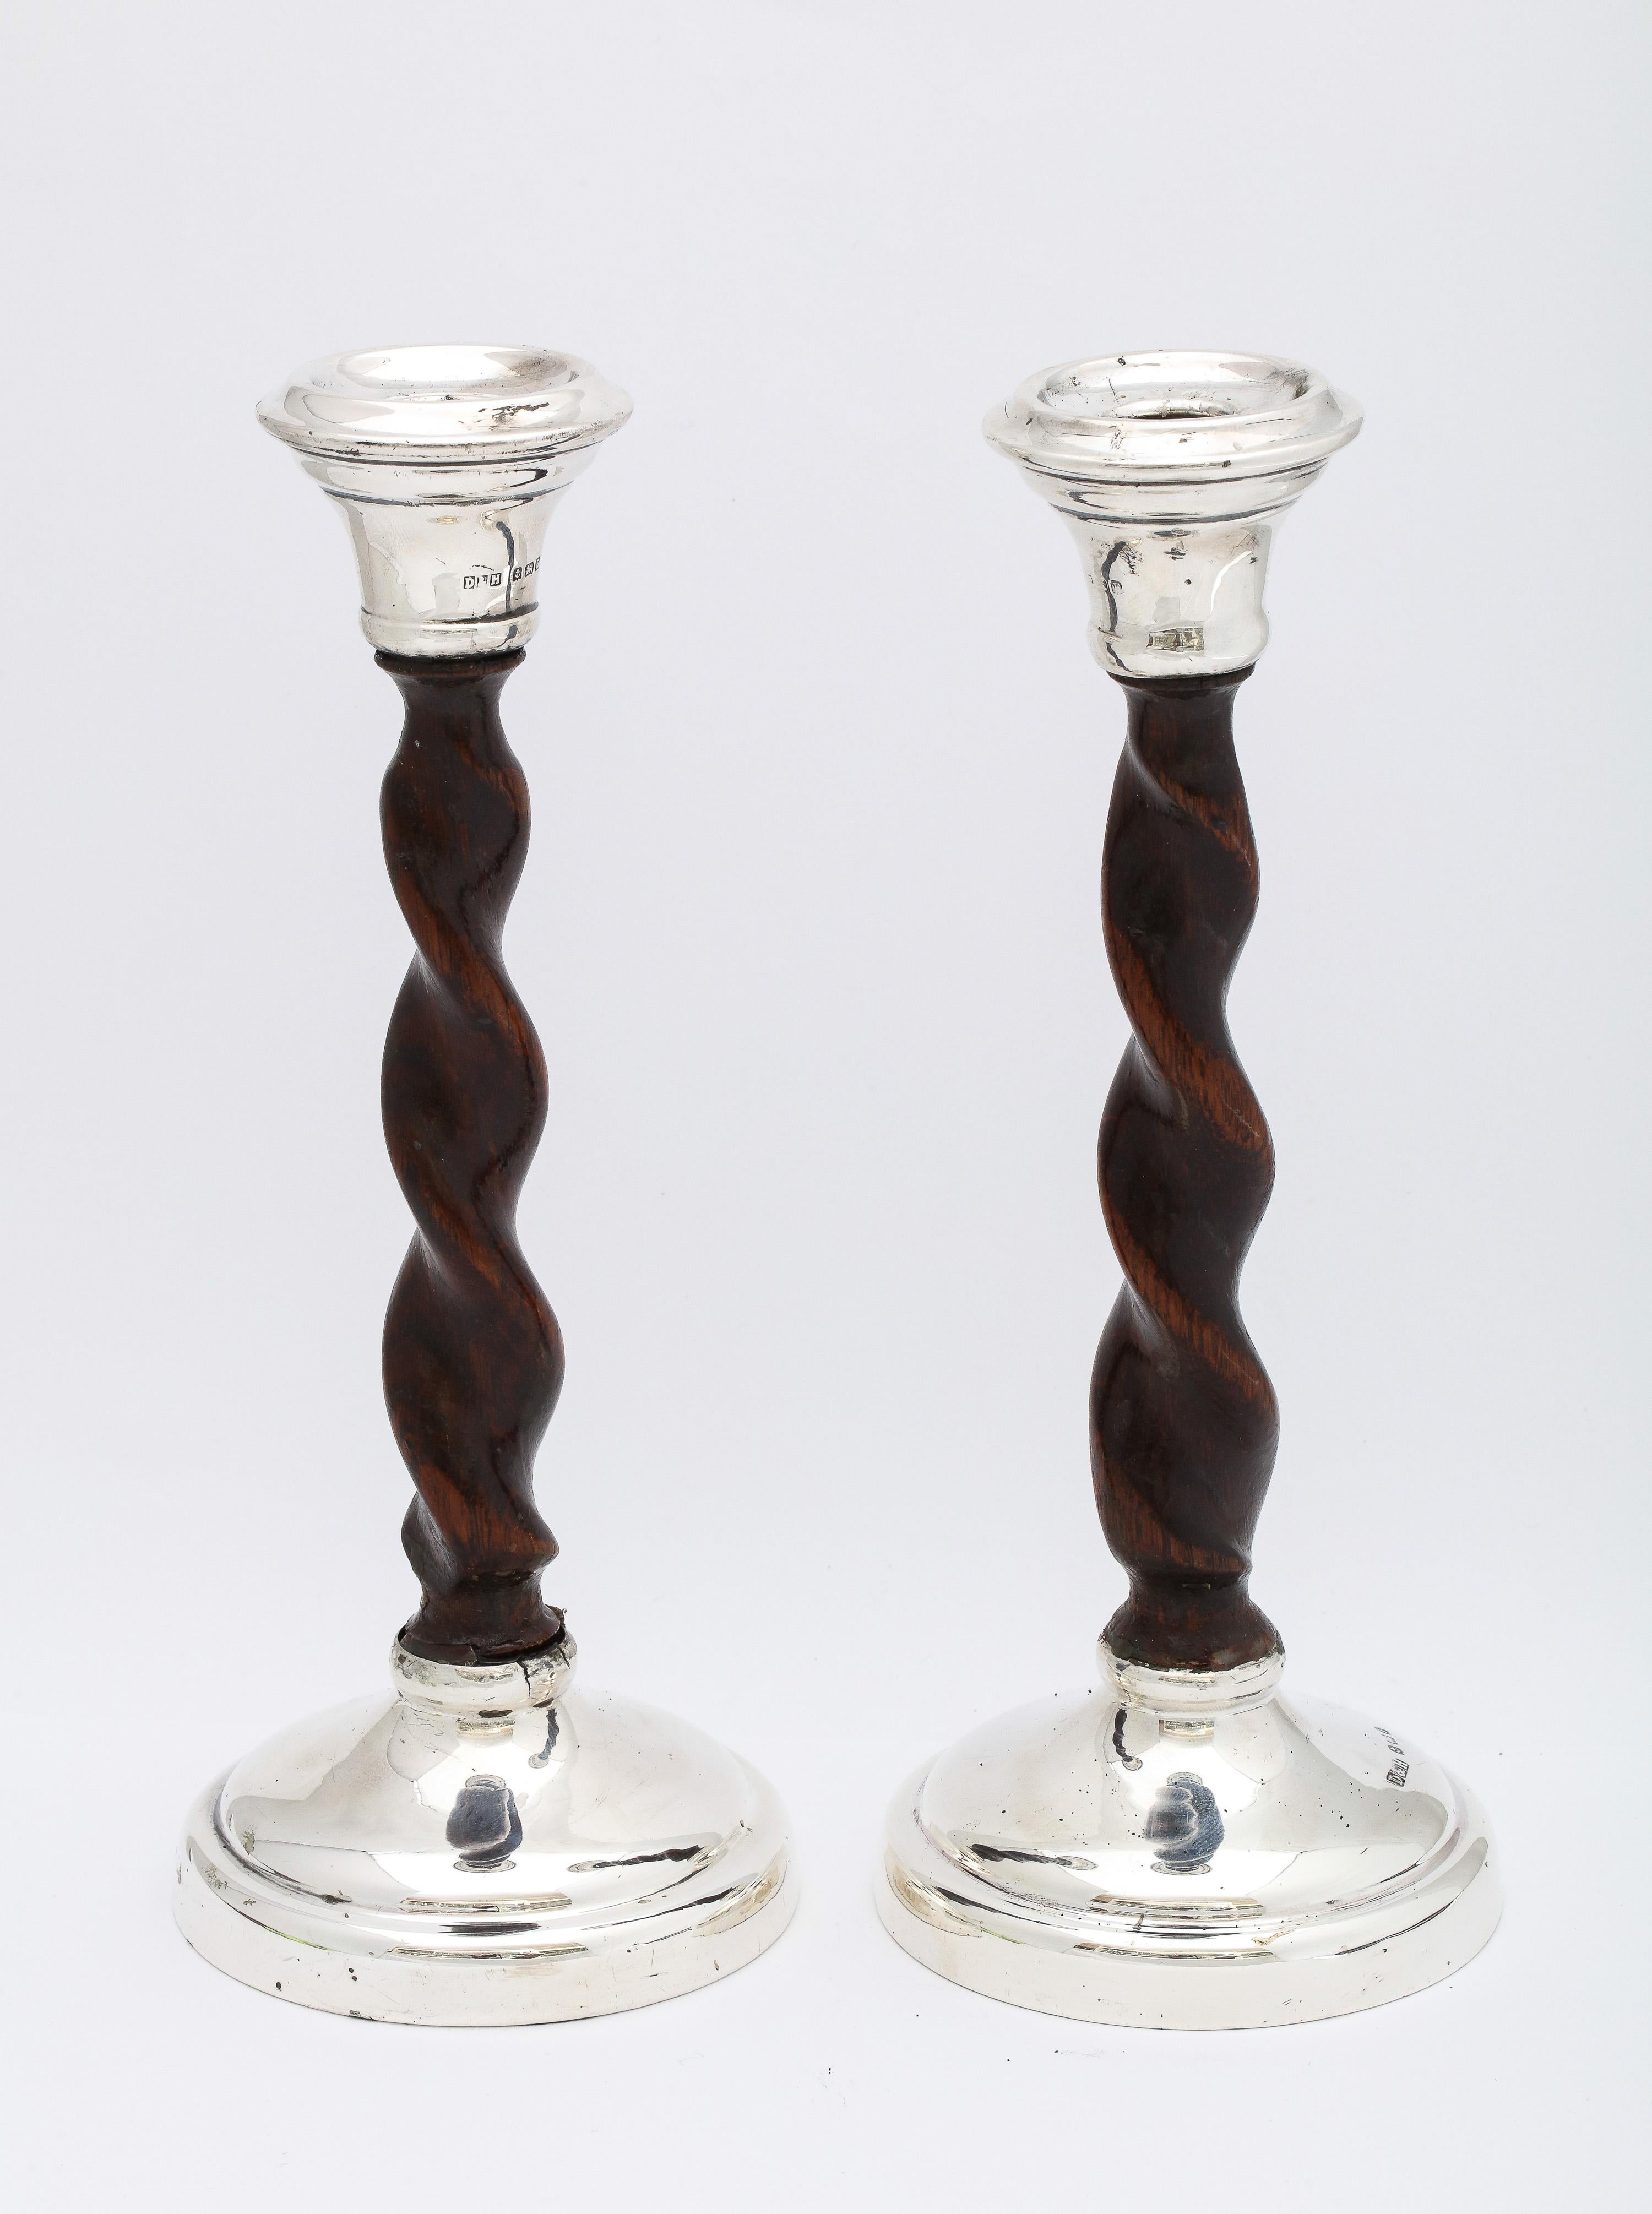 Arts and Crafts Period, sterling silver-mounted barley twist wood pricket candlesticks, Birmingham, England, year-hallmarked for 1930, Deykin and Harrison - makers. Each candlestick measures 8 3/4 inches high (at highest point - without pricket) x 3